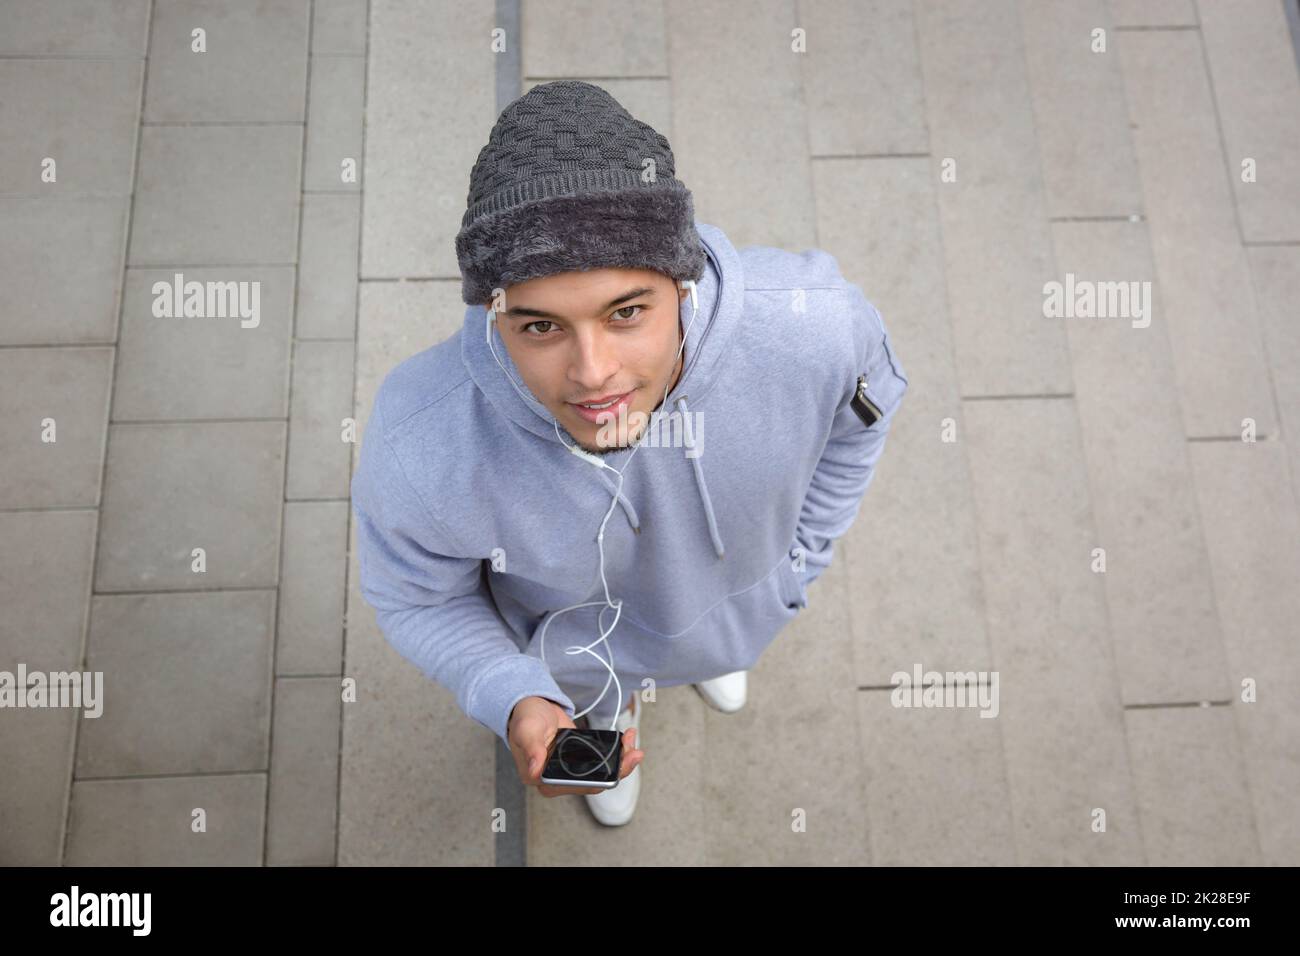 Listening to music young latin man runner sports training from above top view Stock Photo